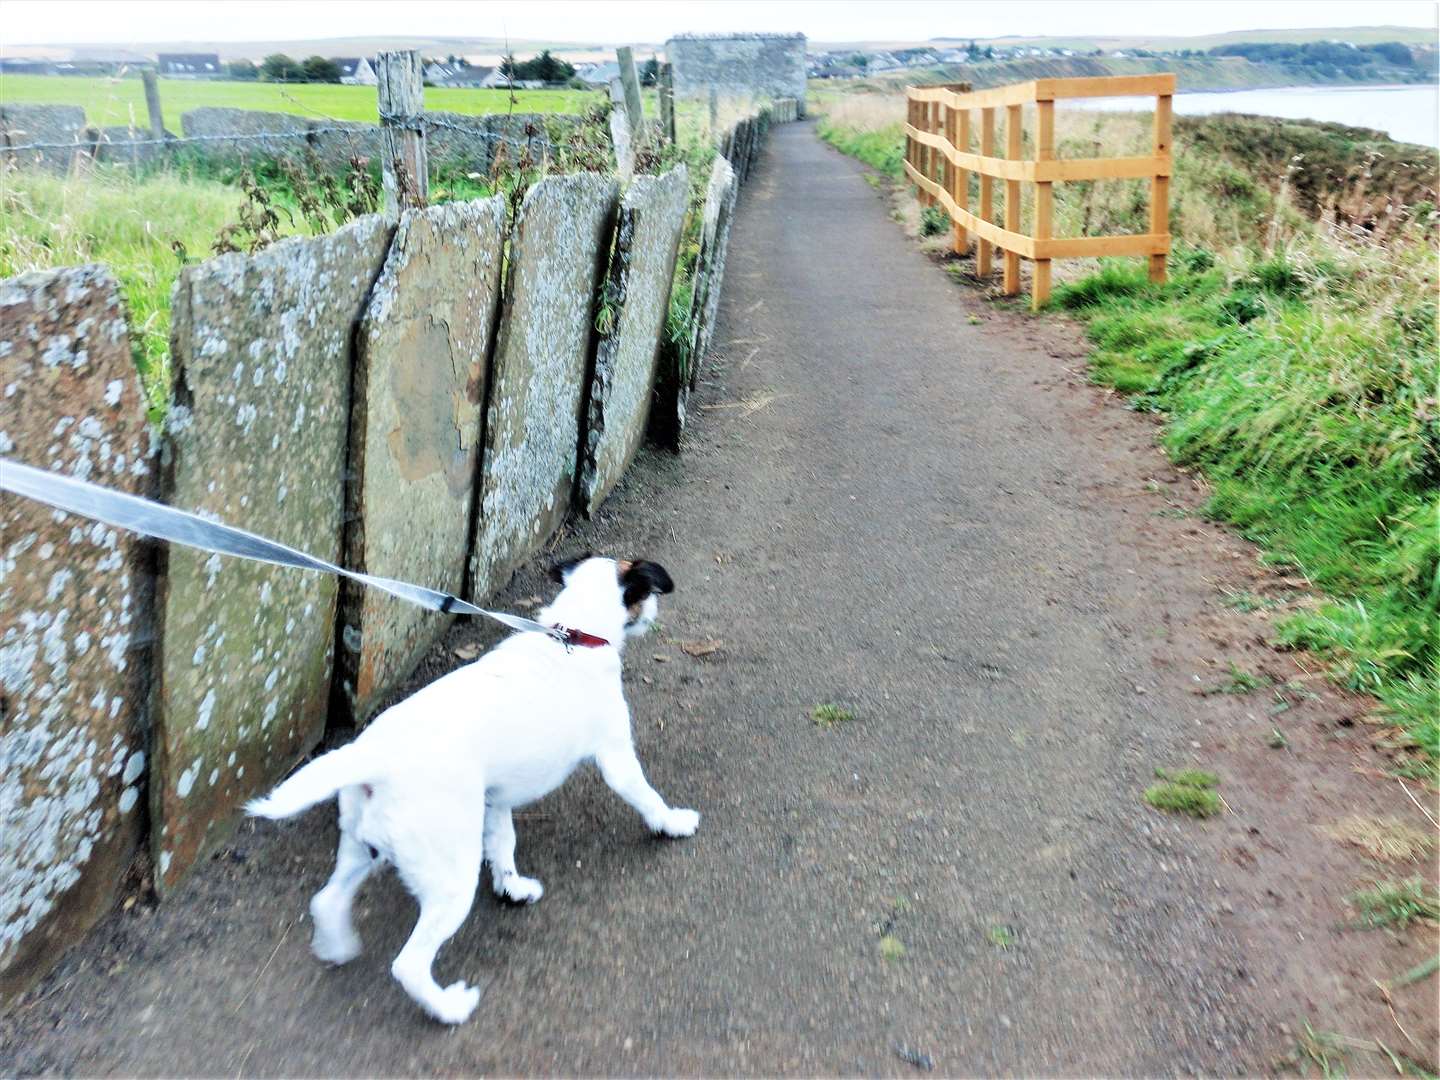 Dogwalking is popular along Victoria Walk in Thurso and it is recommended that you keep your dog, like Daisy here, on a lead. Picture: DGS